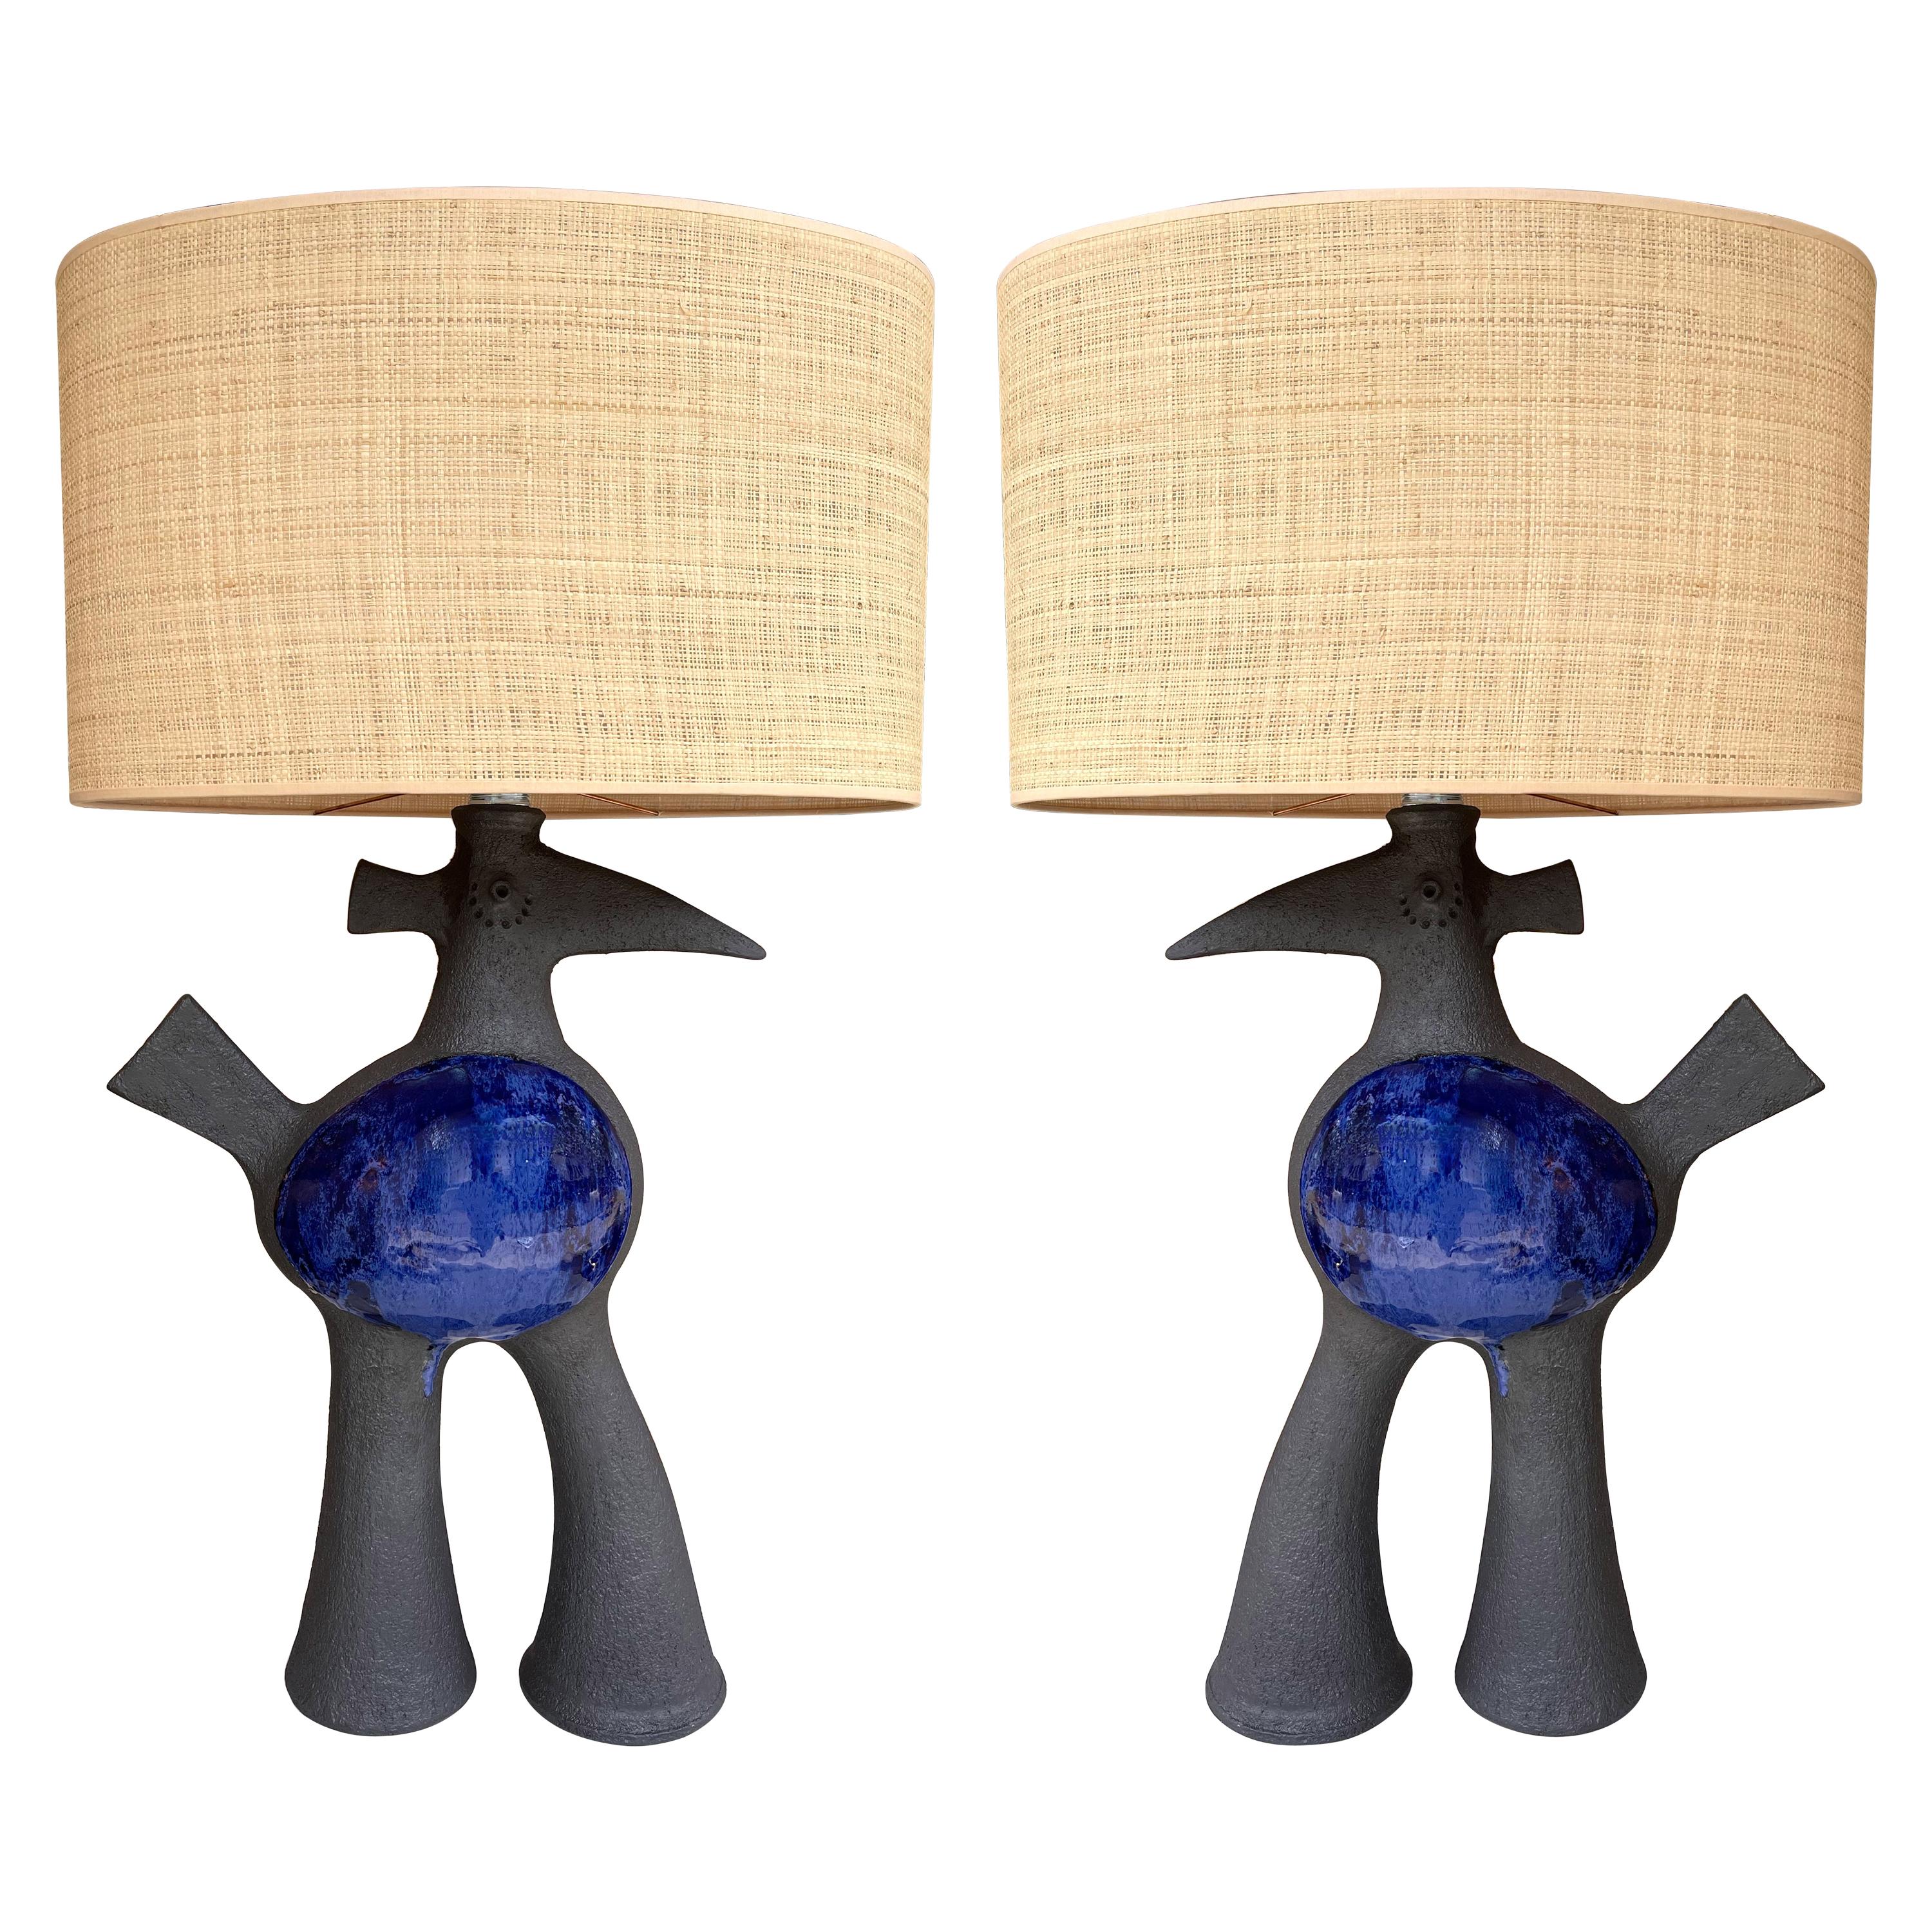 Pair of Bird Ceramic Lamps by Dominique Pouchain, France, 2020